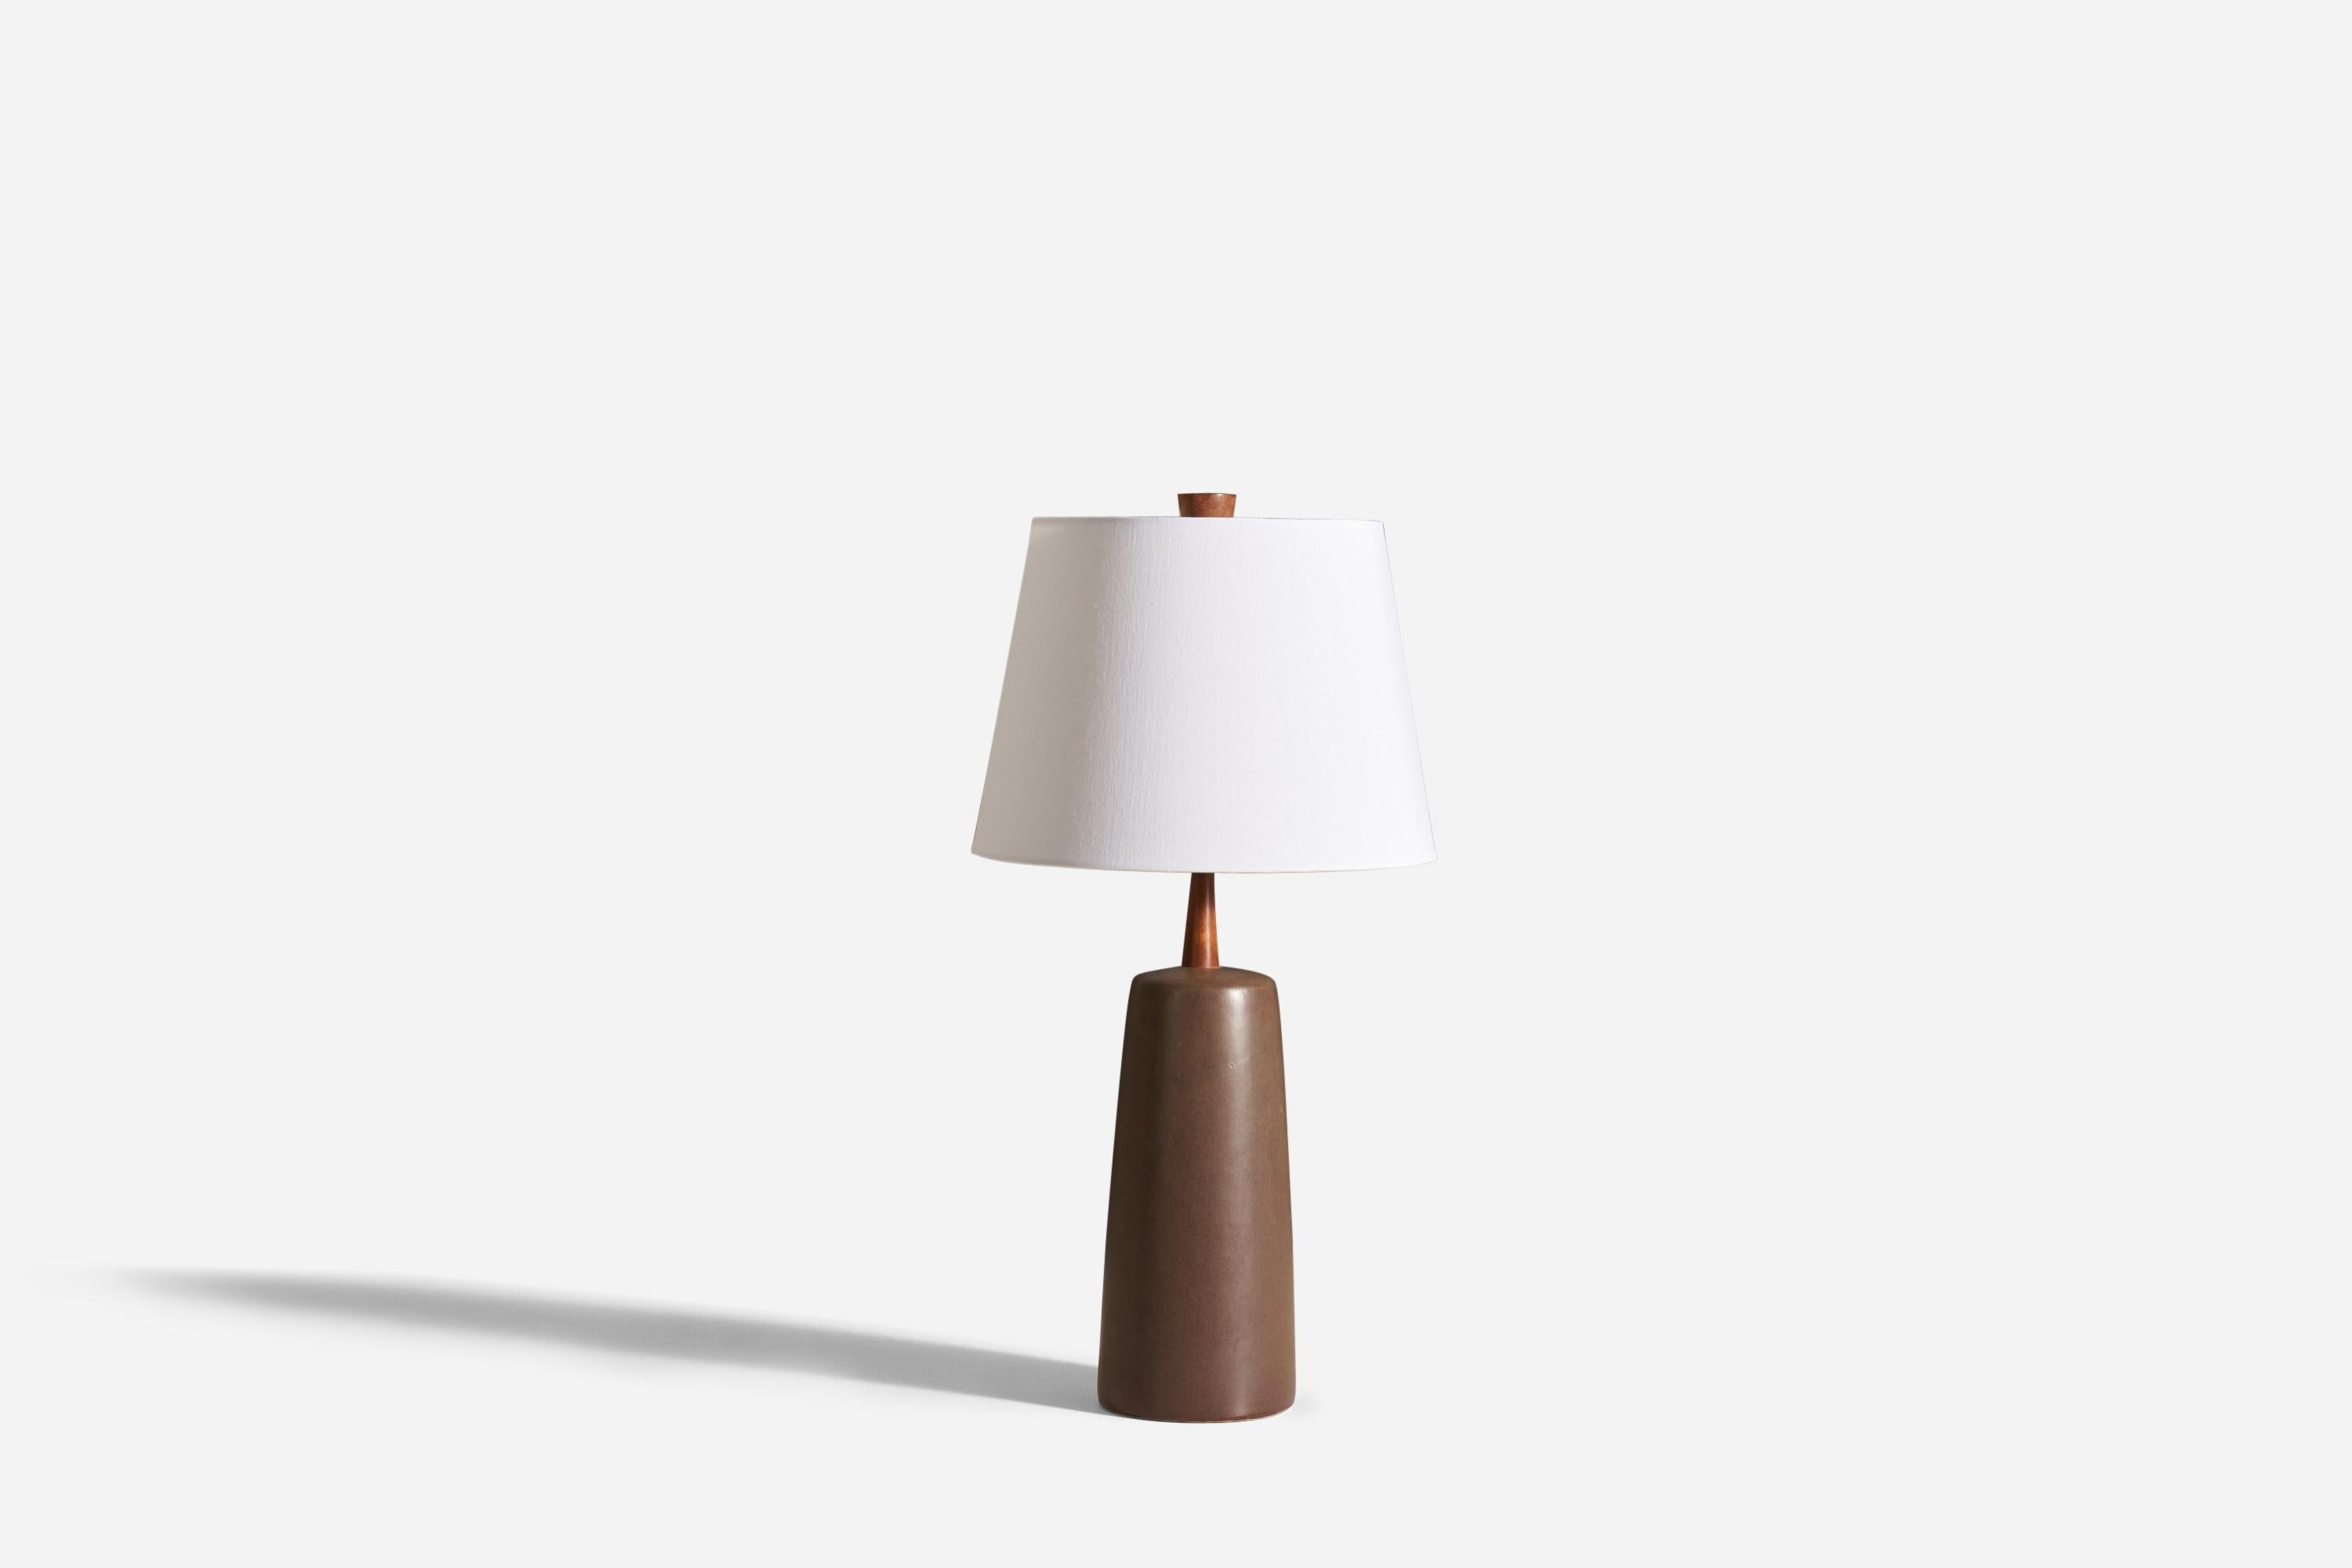 A table lamp designed by husband and wife duo Jane & Gordon Martz. Produced by Marshall Studios, Indiana.

The base is slip-cast and then dipped into glaze. The design also incorporates an exquisite walnut neck and finial. The base is signed.